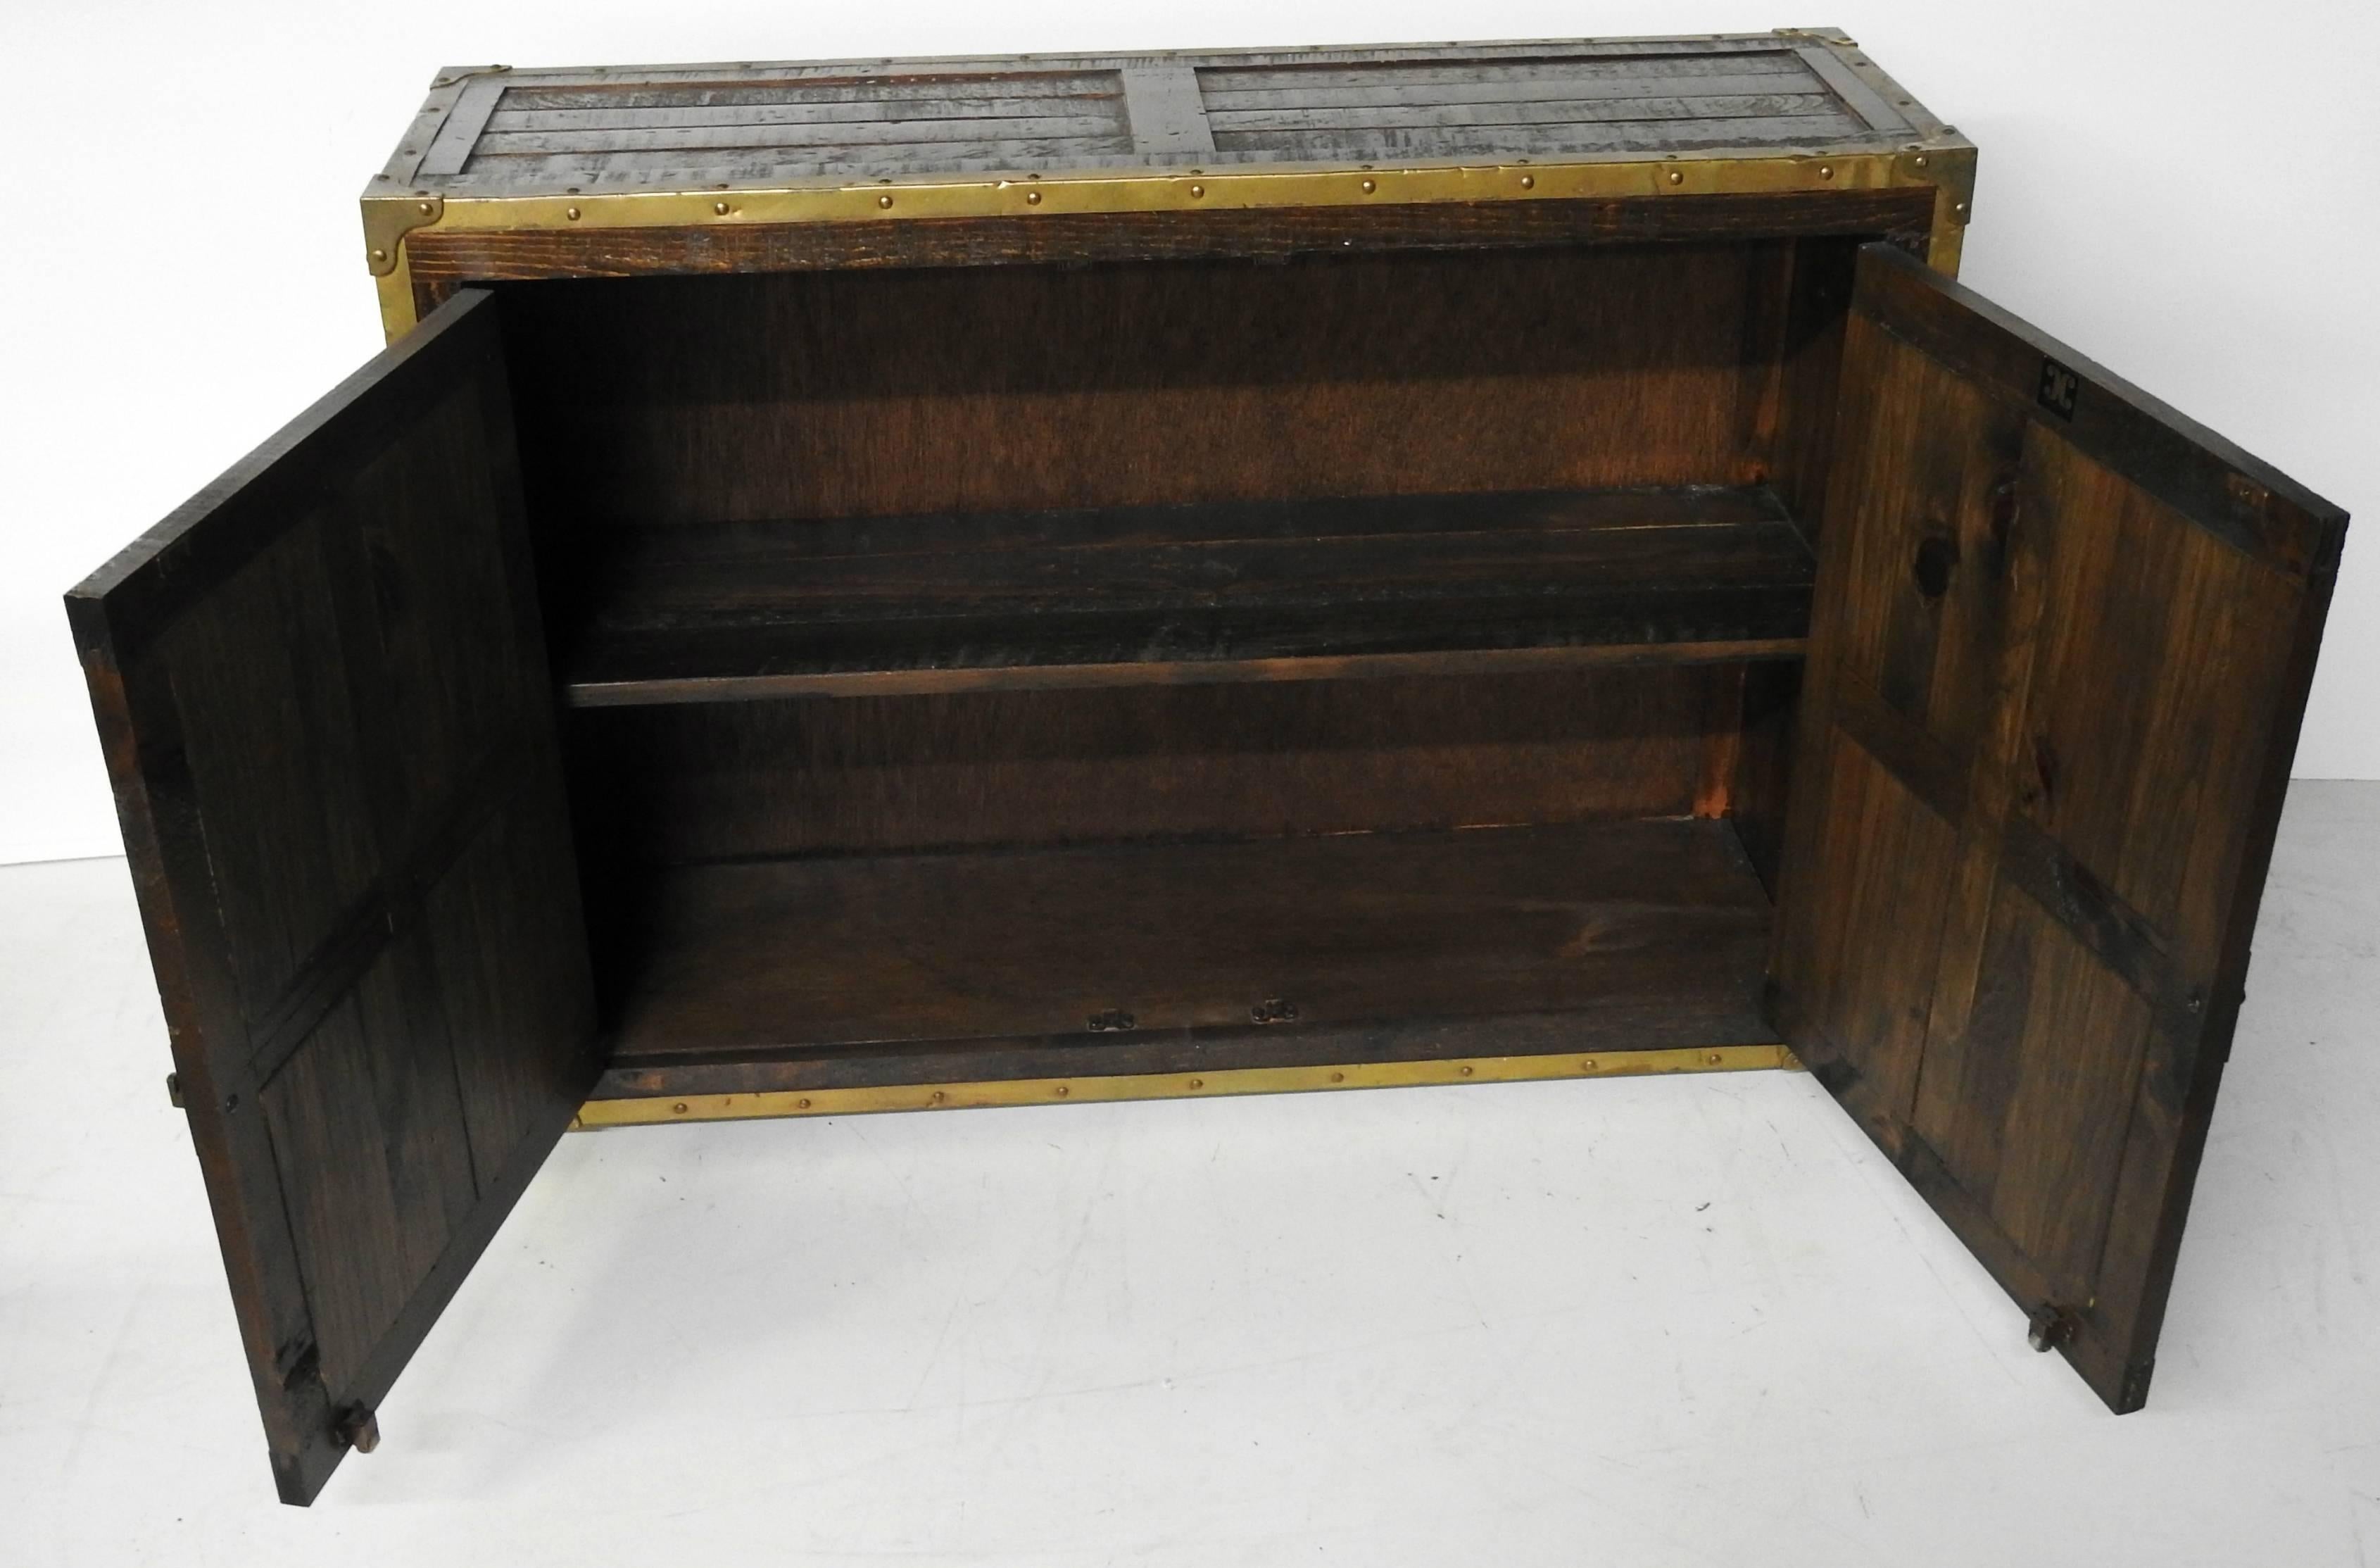 Habersham Campaign chest made of reconstituted wood with bronze trim and handles.